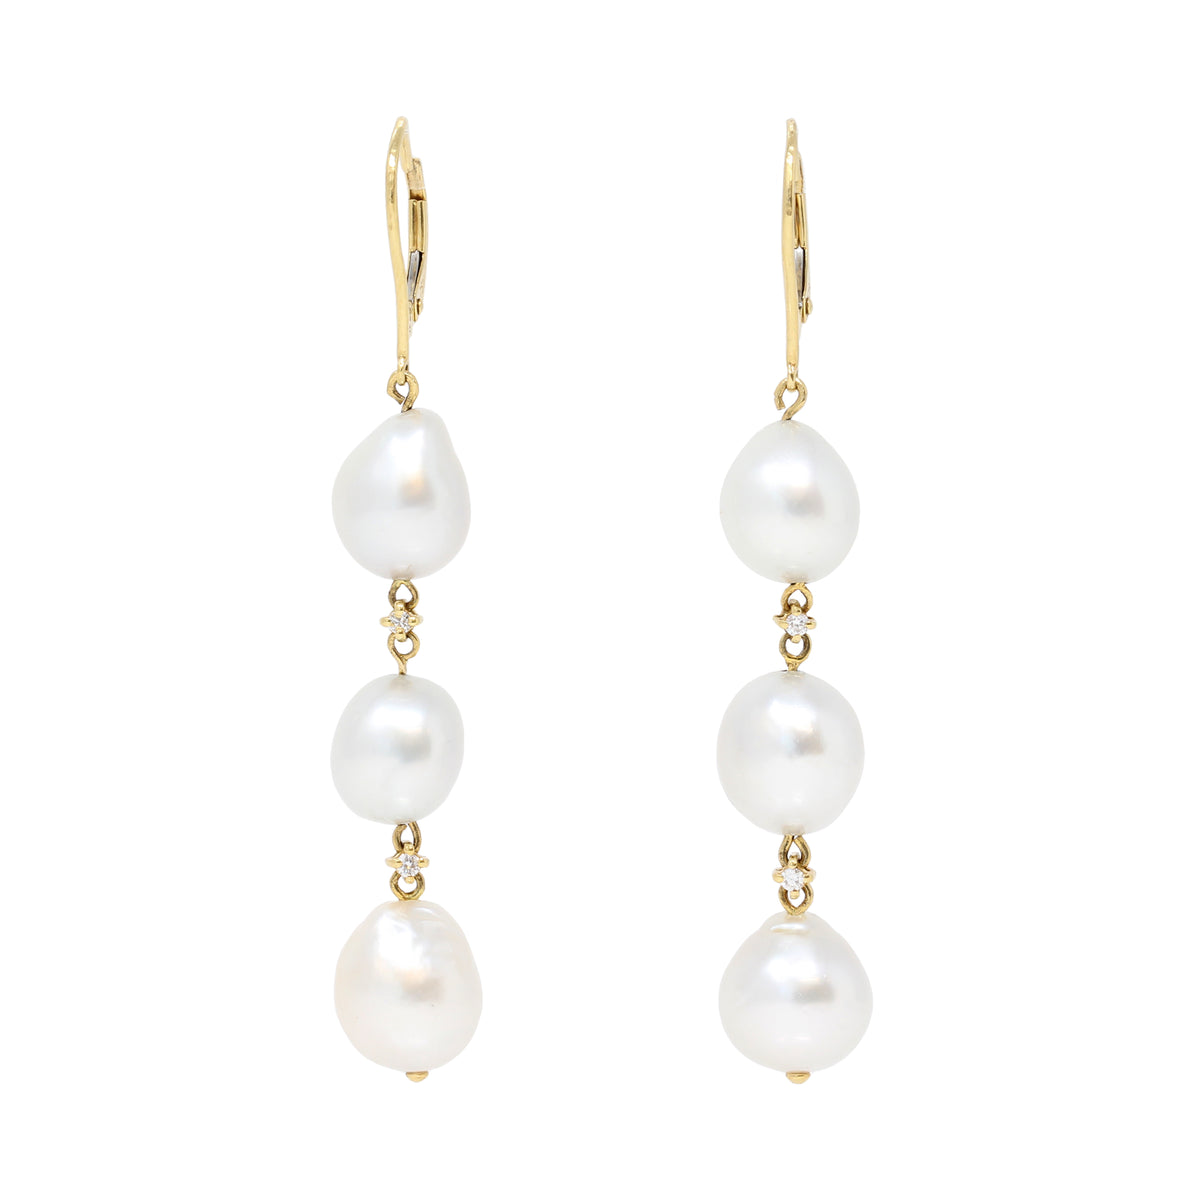 Pair of South Sea Baroque Pearls 18k Gold Dangling Earrings with Diamond Accents